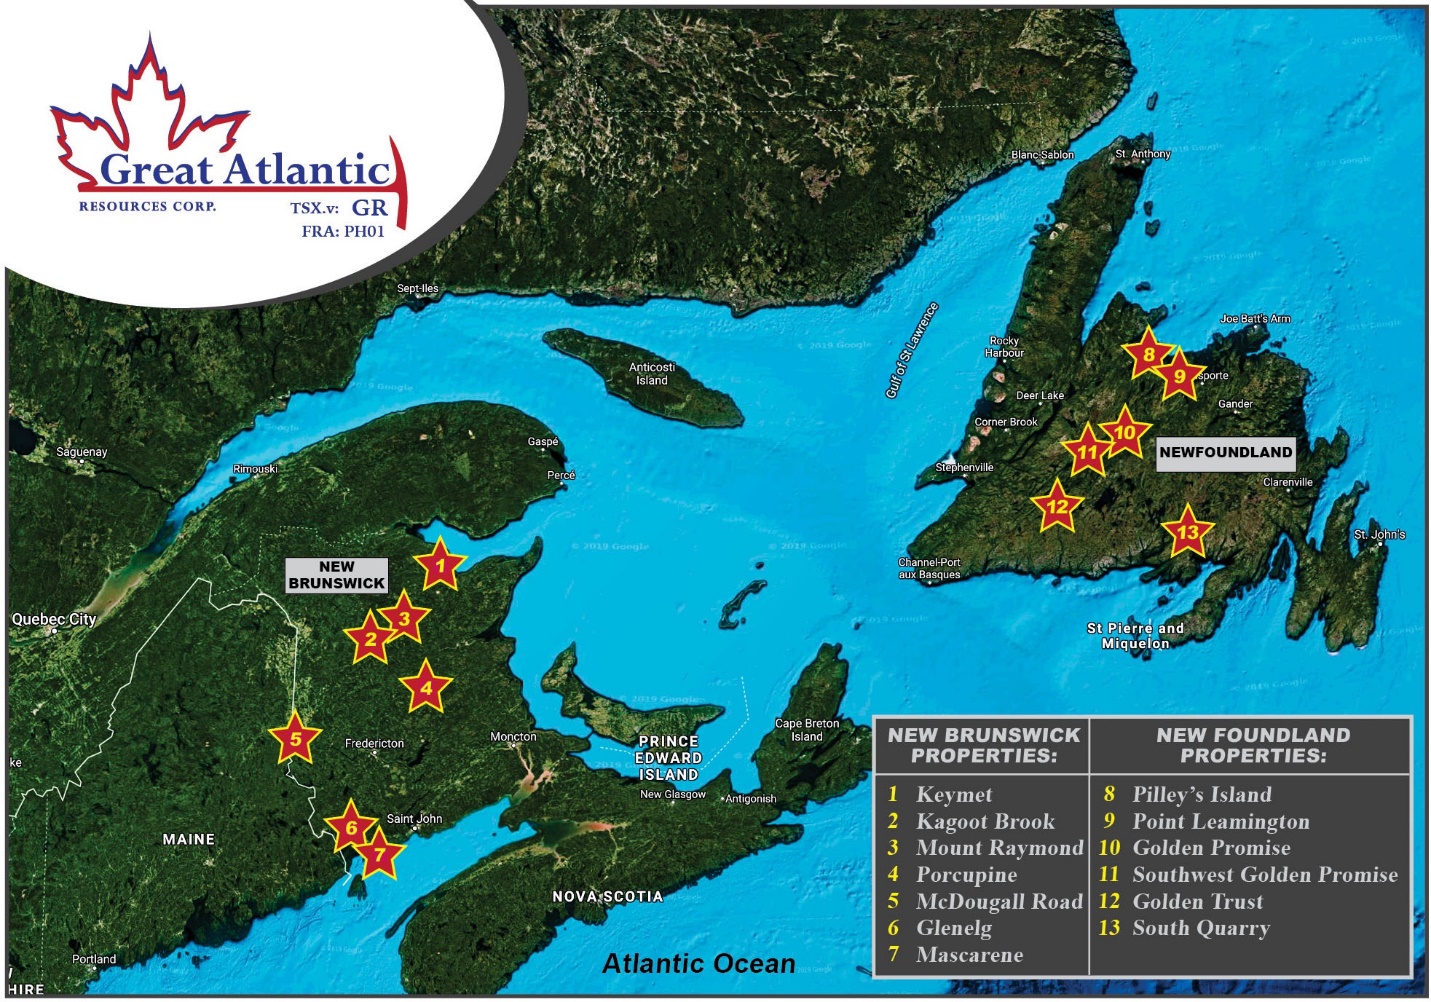 Great Atlantic Resources Corp., Wednesday, February 19, 2020, Press release picture